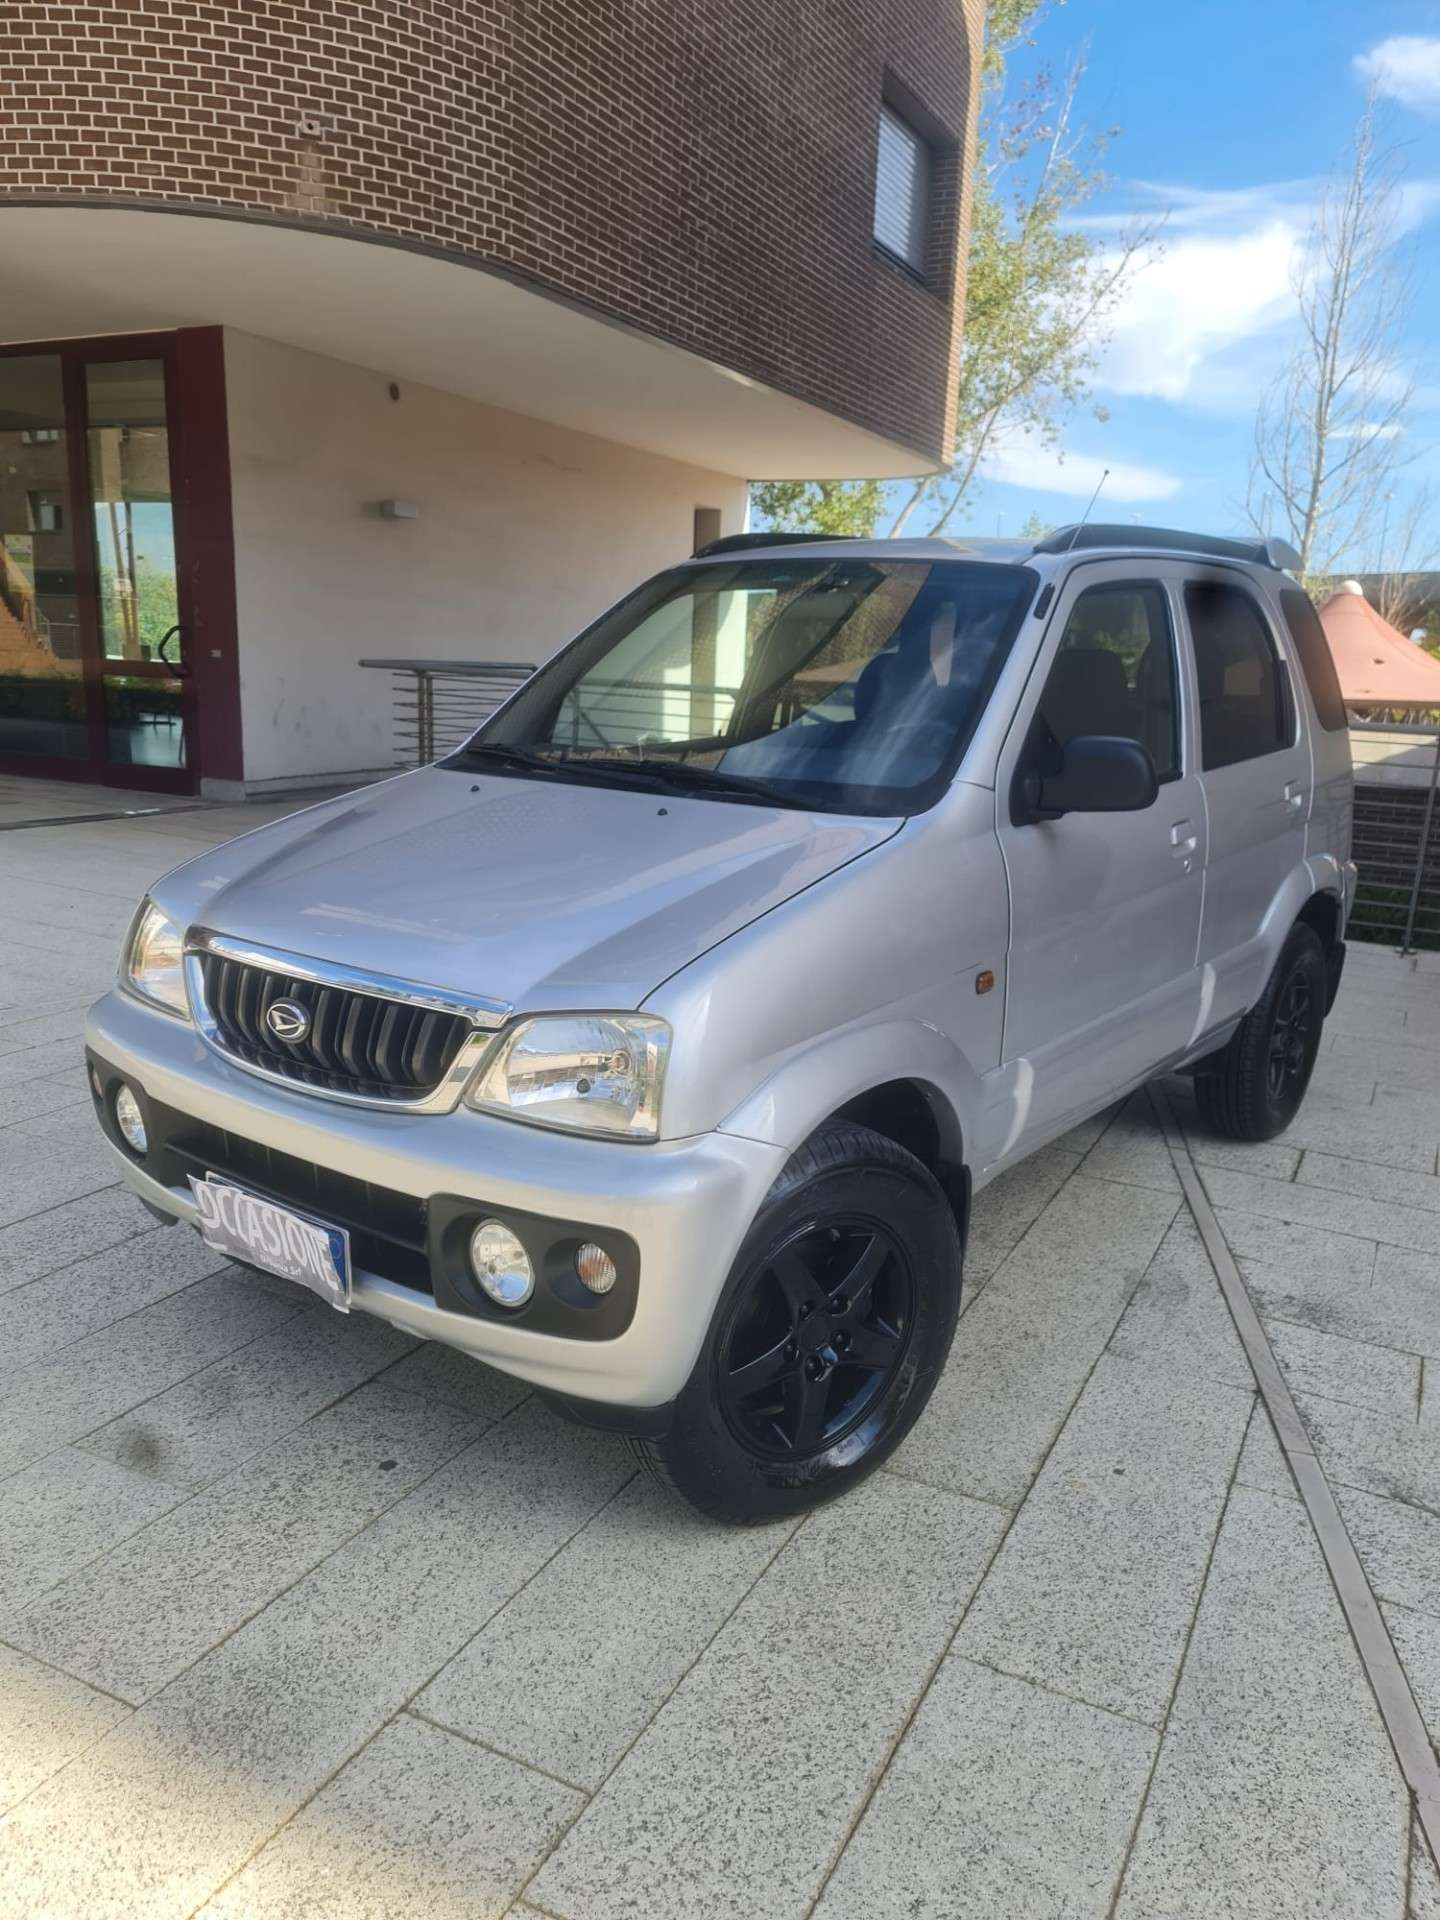 Daihatsu Terios Off-Road/Pick-up in Grey used in Napoli - Na for € 6,390.-